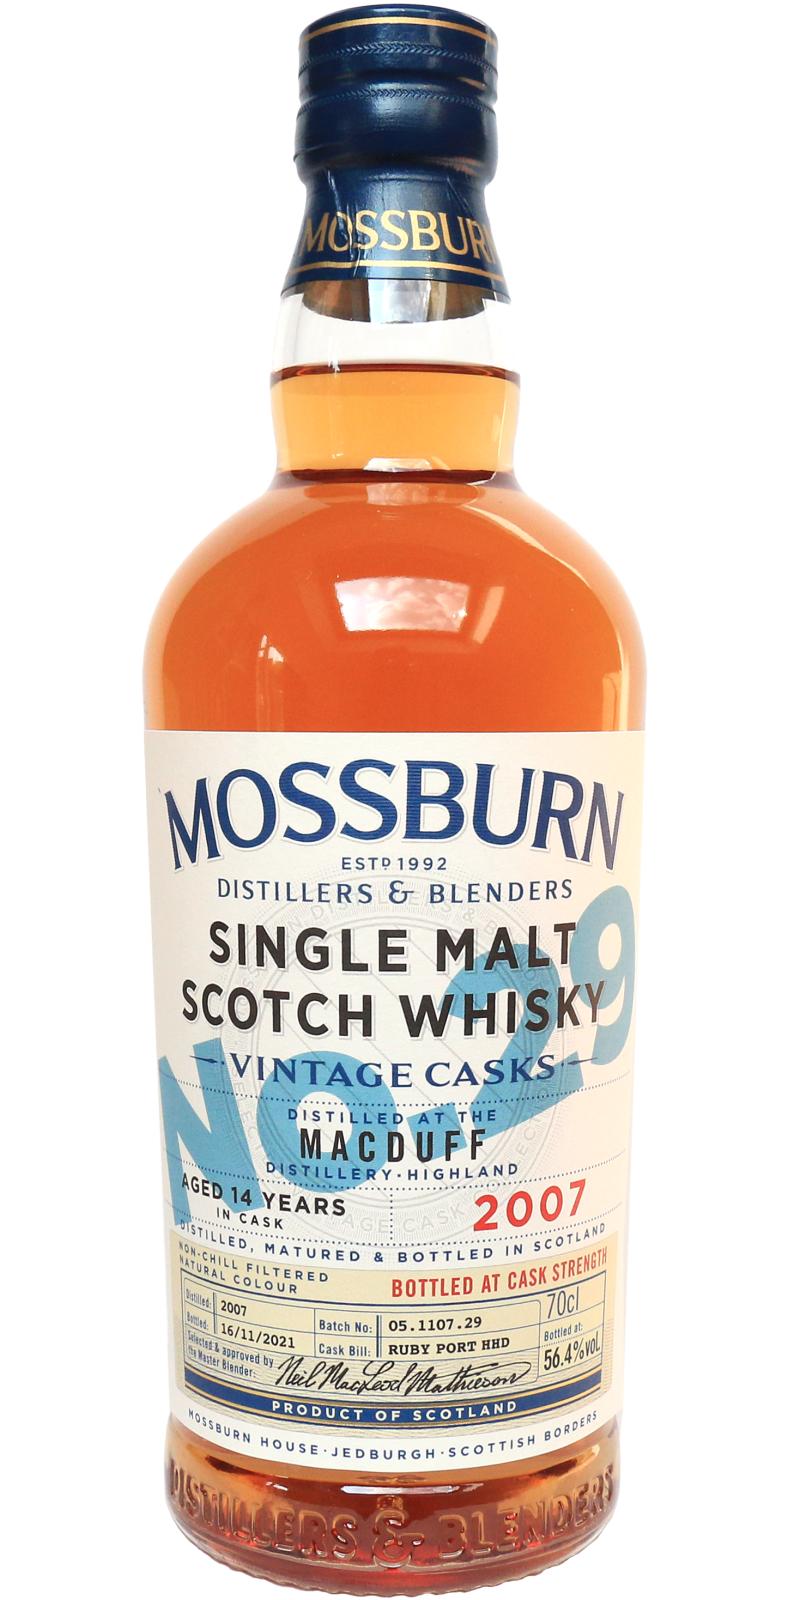 Mossburn Macduff 10yr Single Malt Scotch Whisky No.12 a clear glass bottle with a rounded shoulders with a white label and blue top